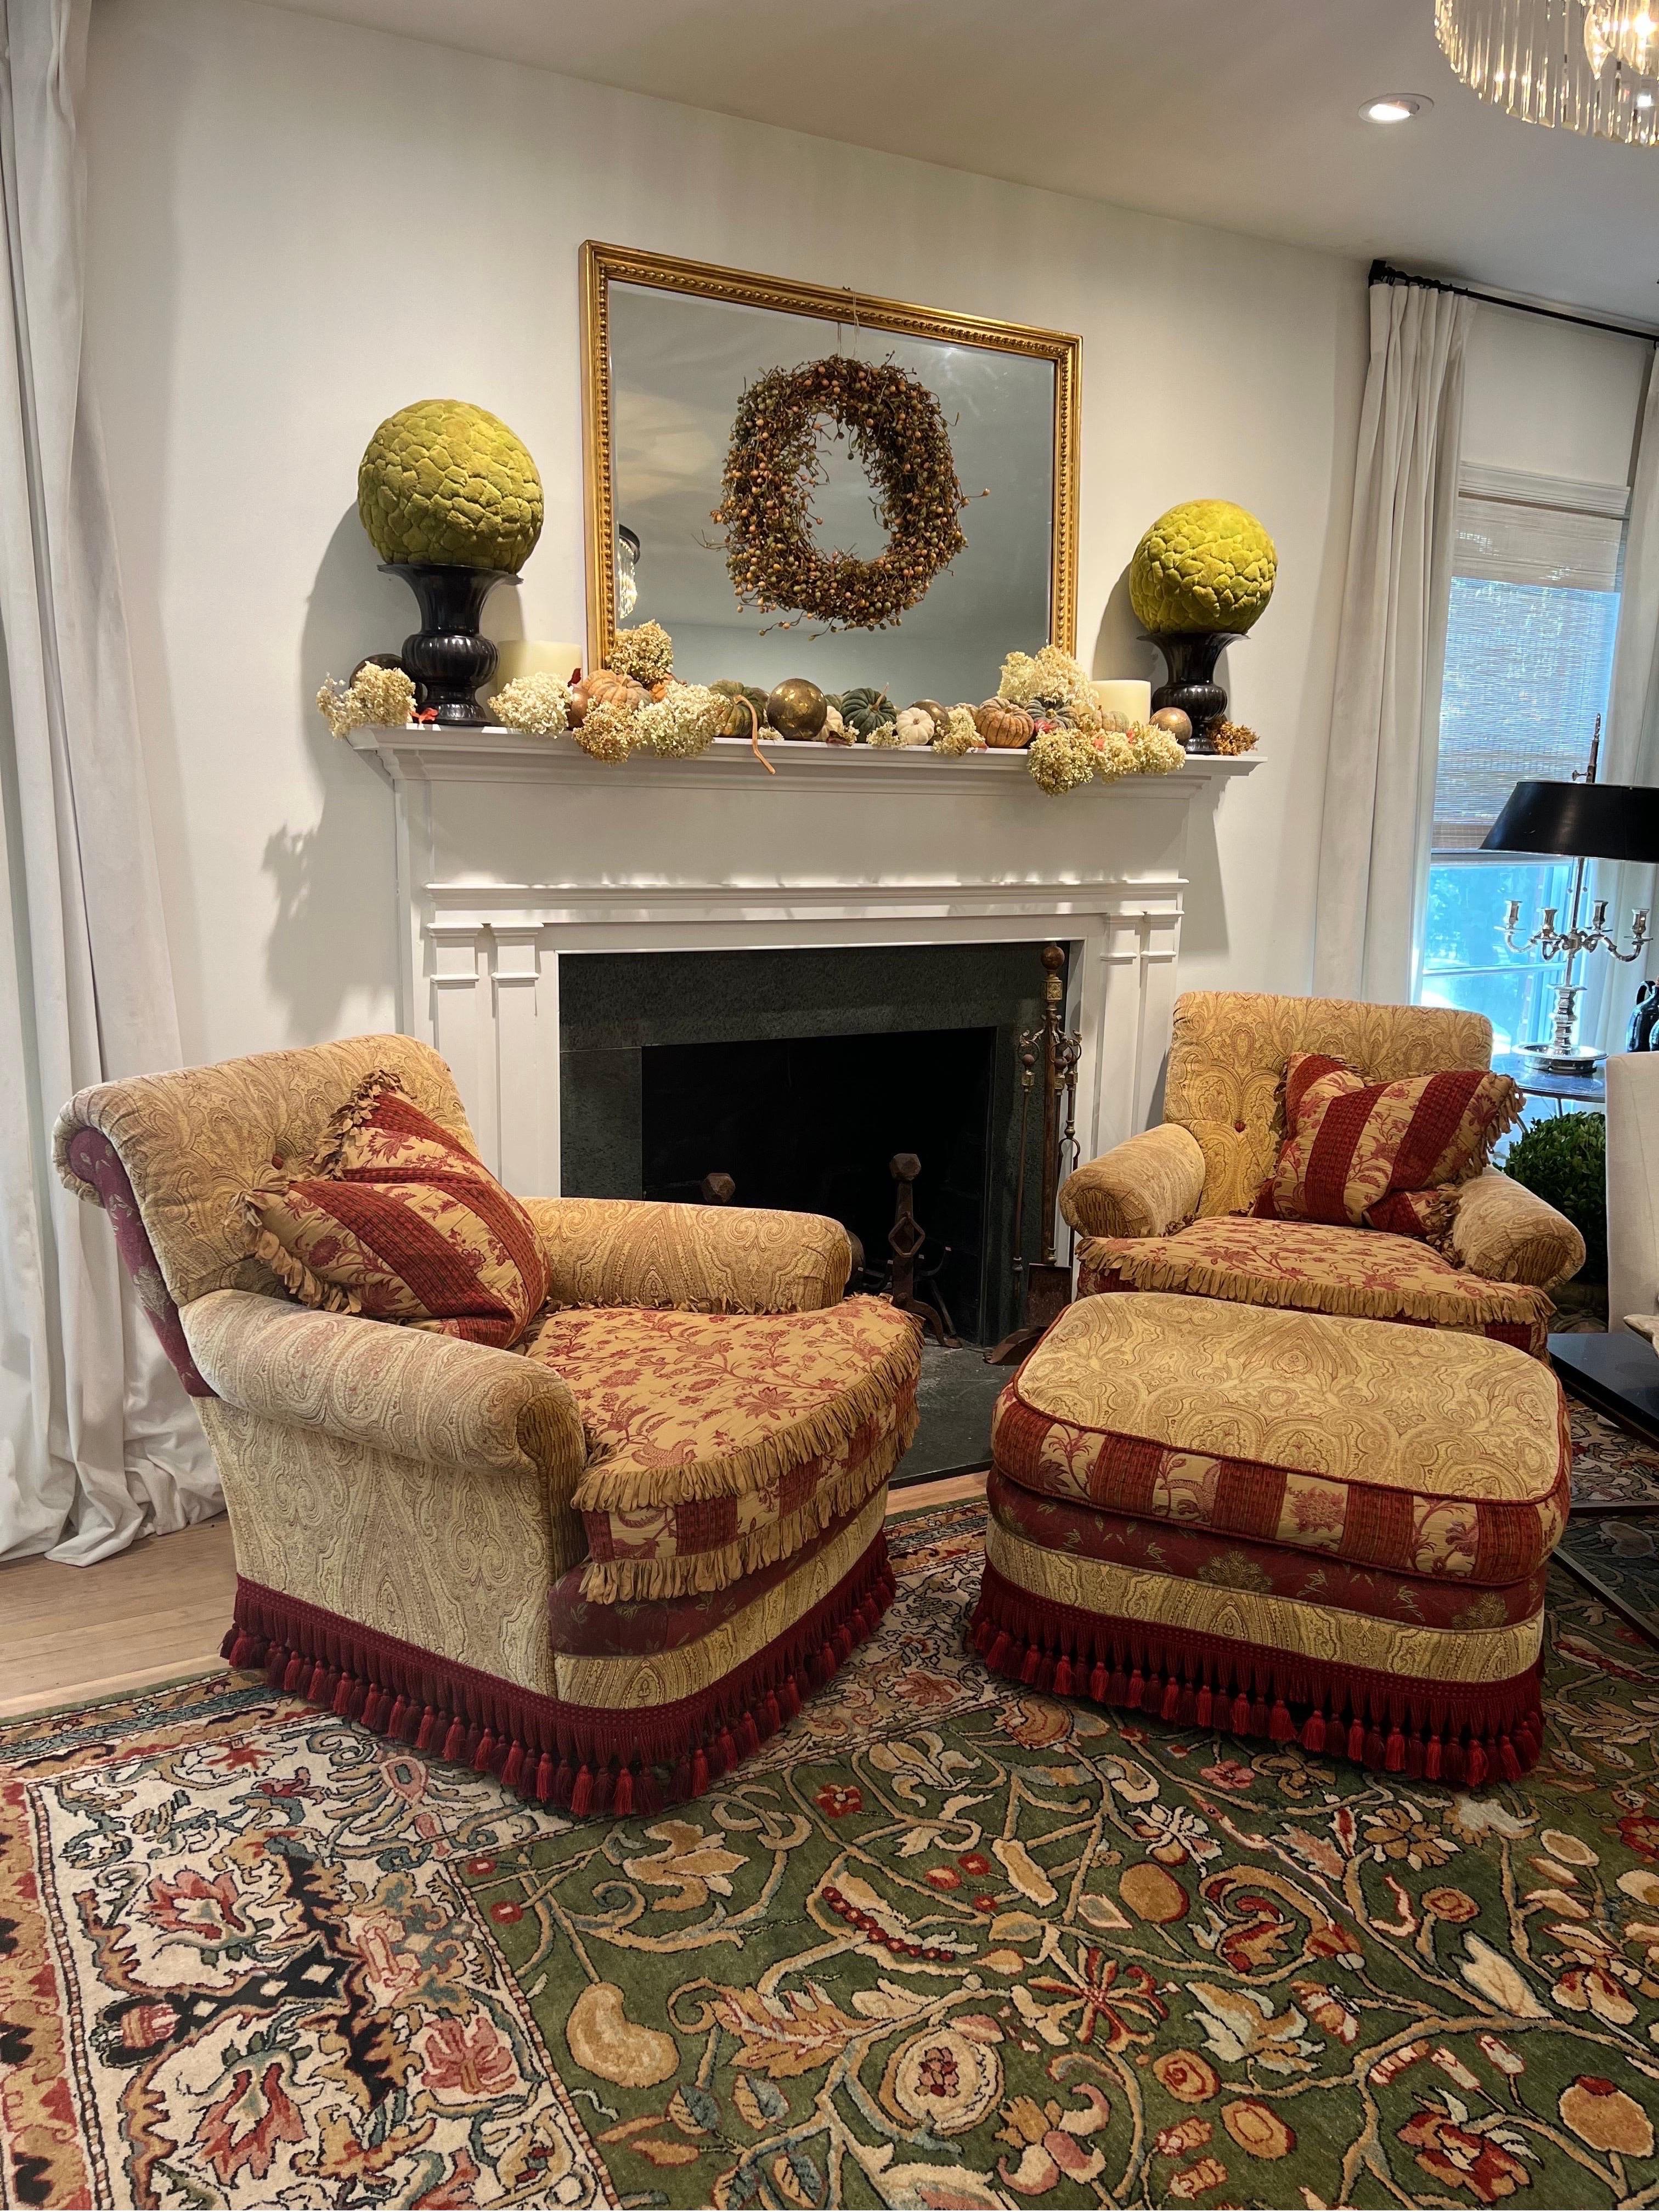 Rare Gorgeous Pair of vintage chairs by EJ Victor with ottoman.
The Carol Hicks Bolton Collection emphasized ornate antique elements and rich fabrics.

This pair includes a matching Ottoman measuring approx 31 x 26.  Tufted back with reversible